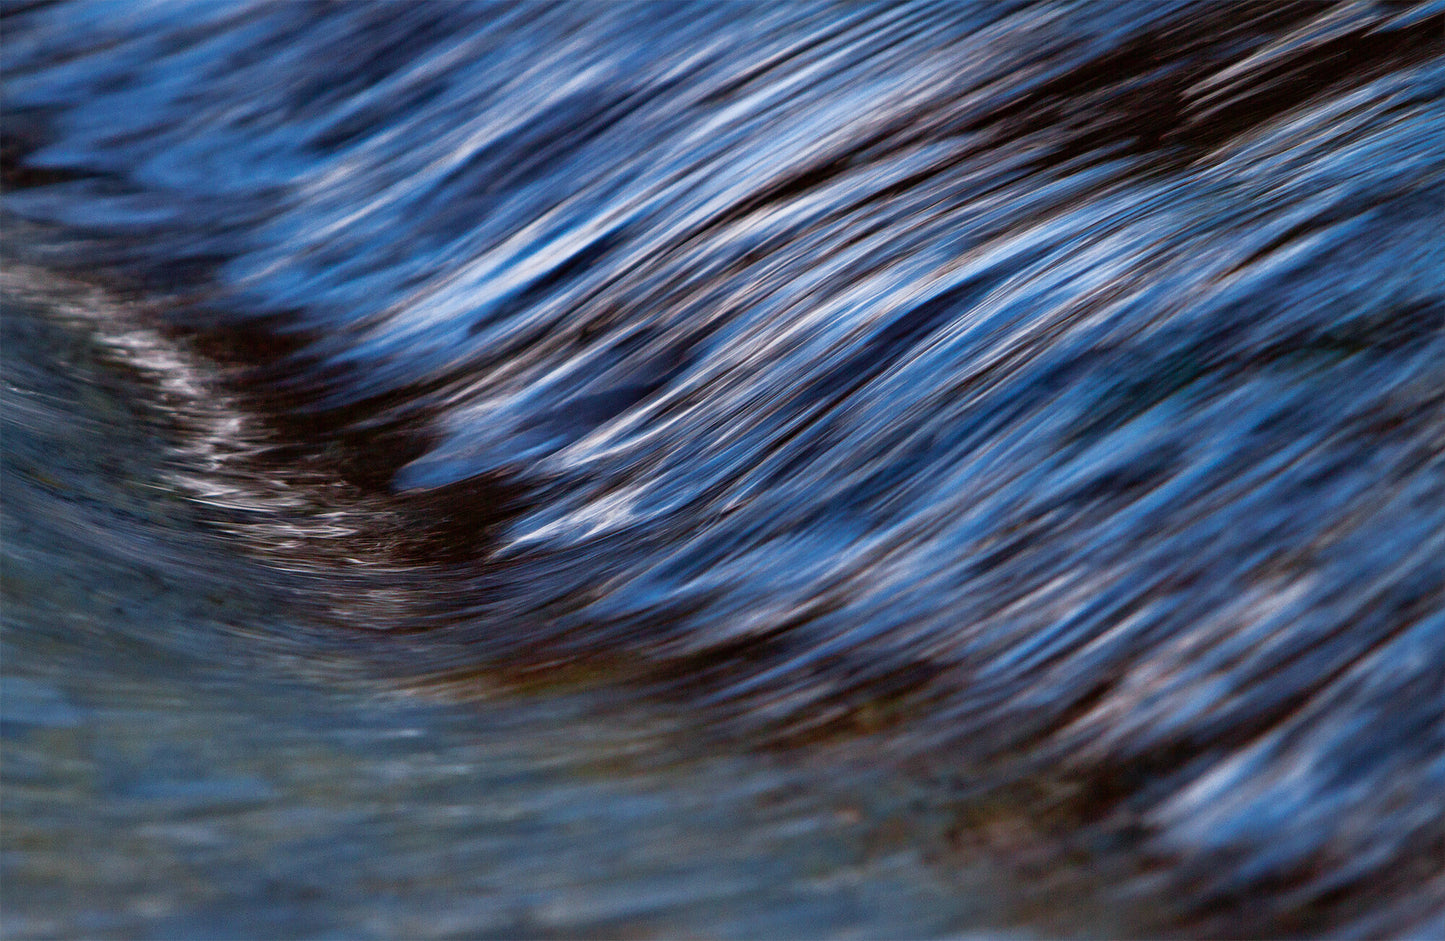 River Wave- A photograph by Mark McInnis. 